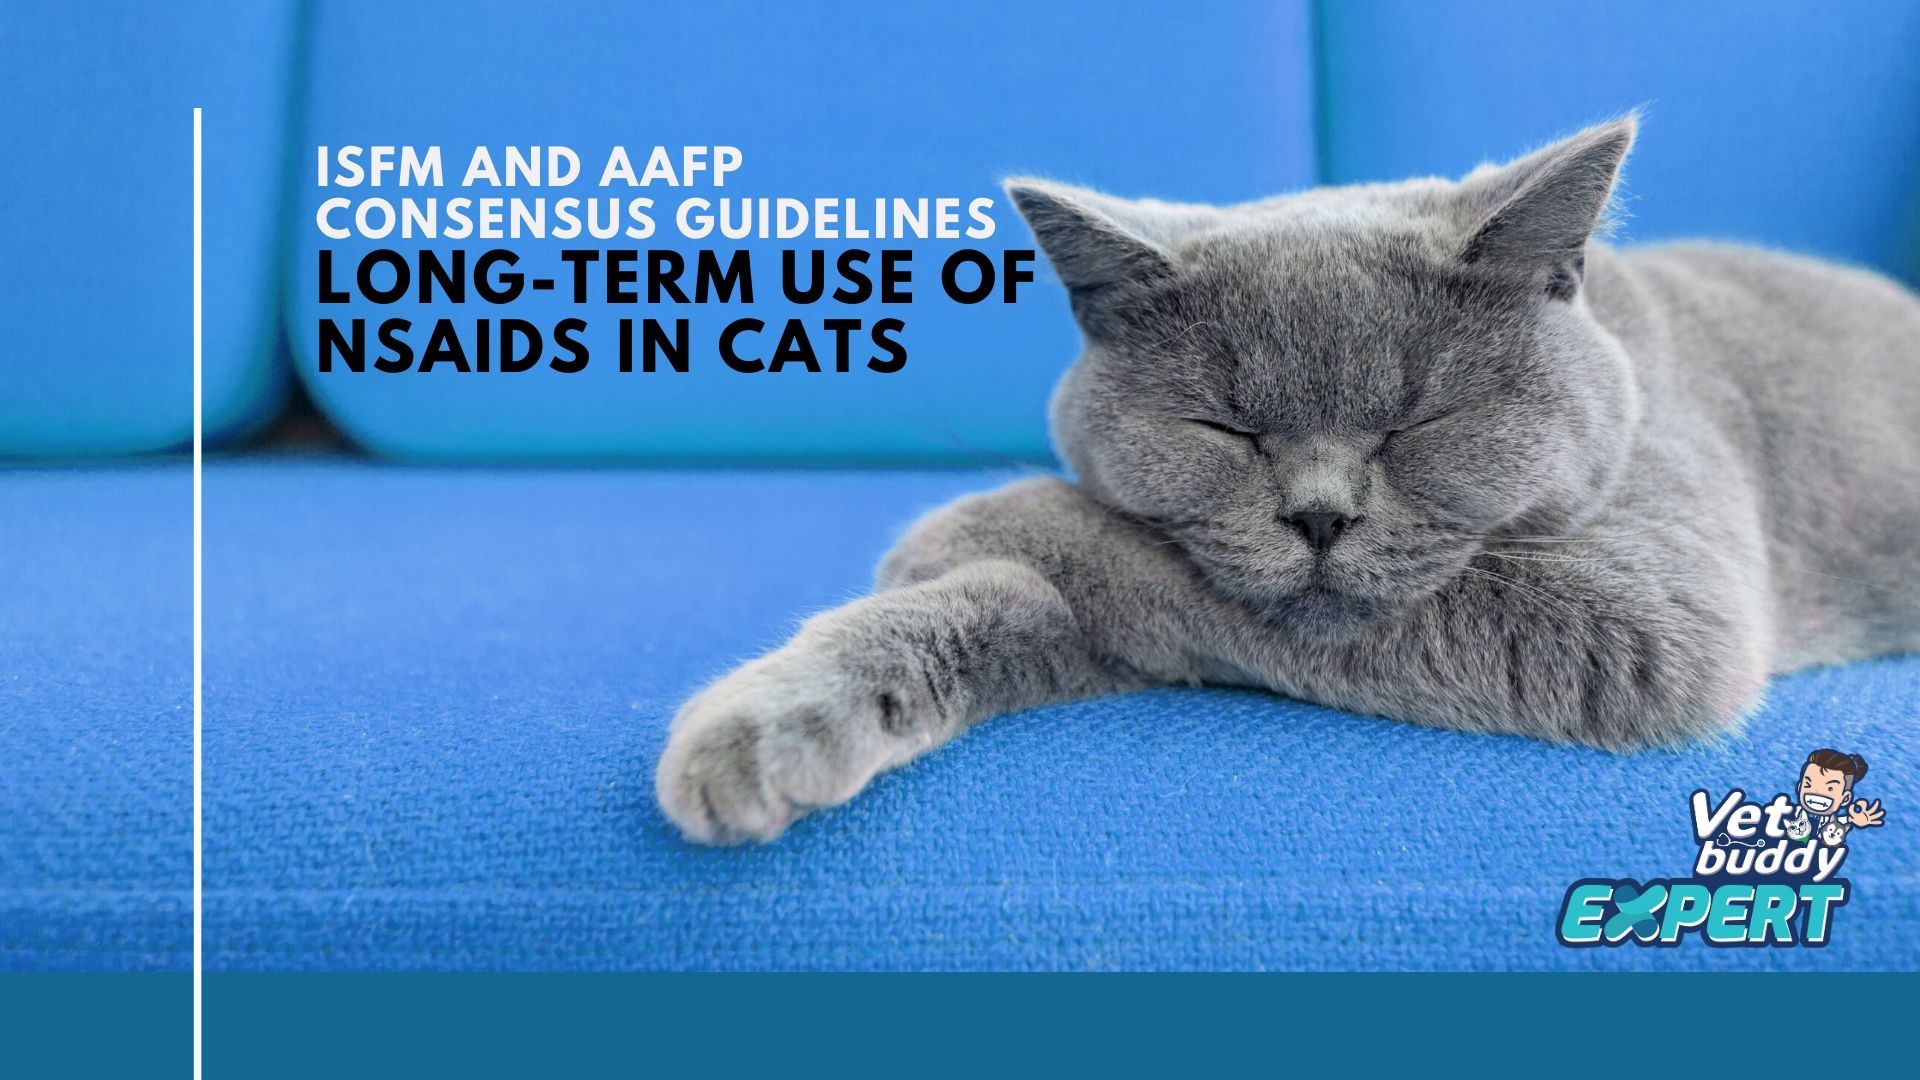 ISFM AND AAFP CONSENSUS GUIDELINES Long-term use of NSAIDs in cats